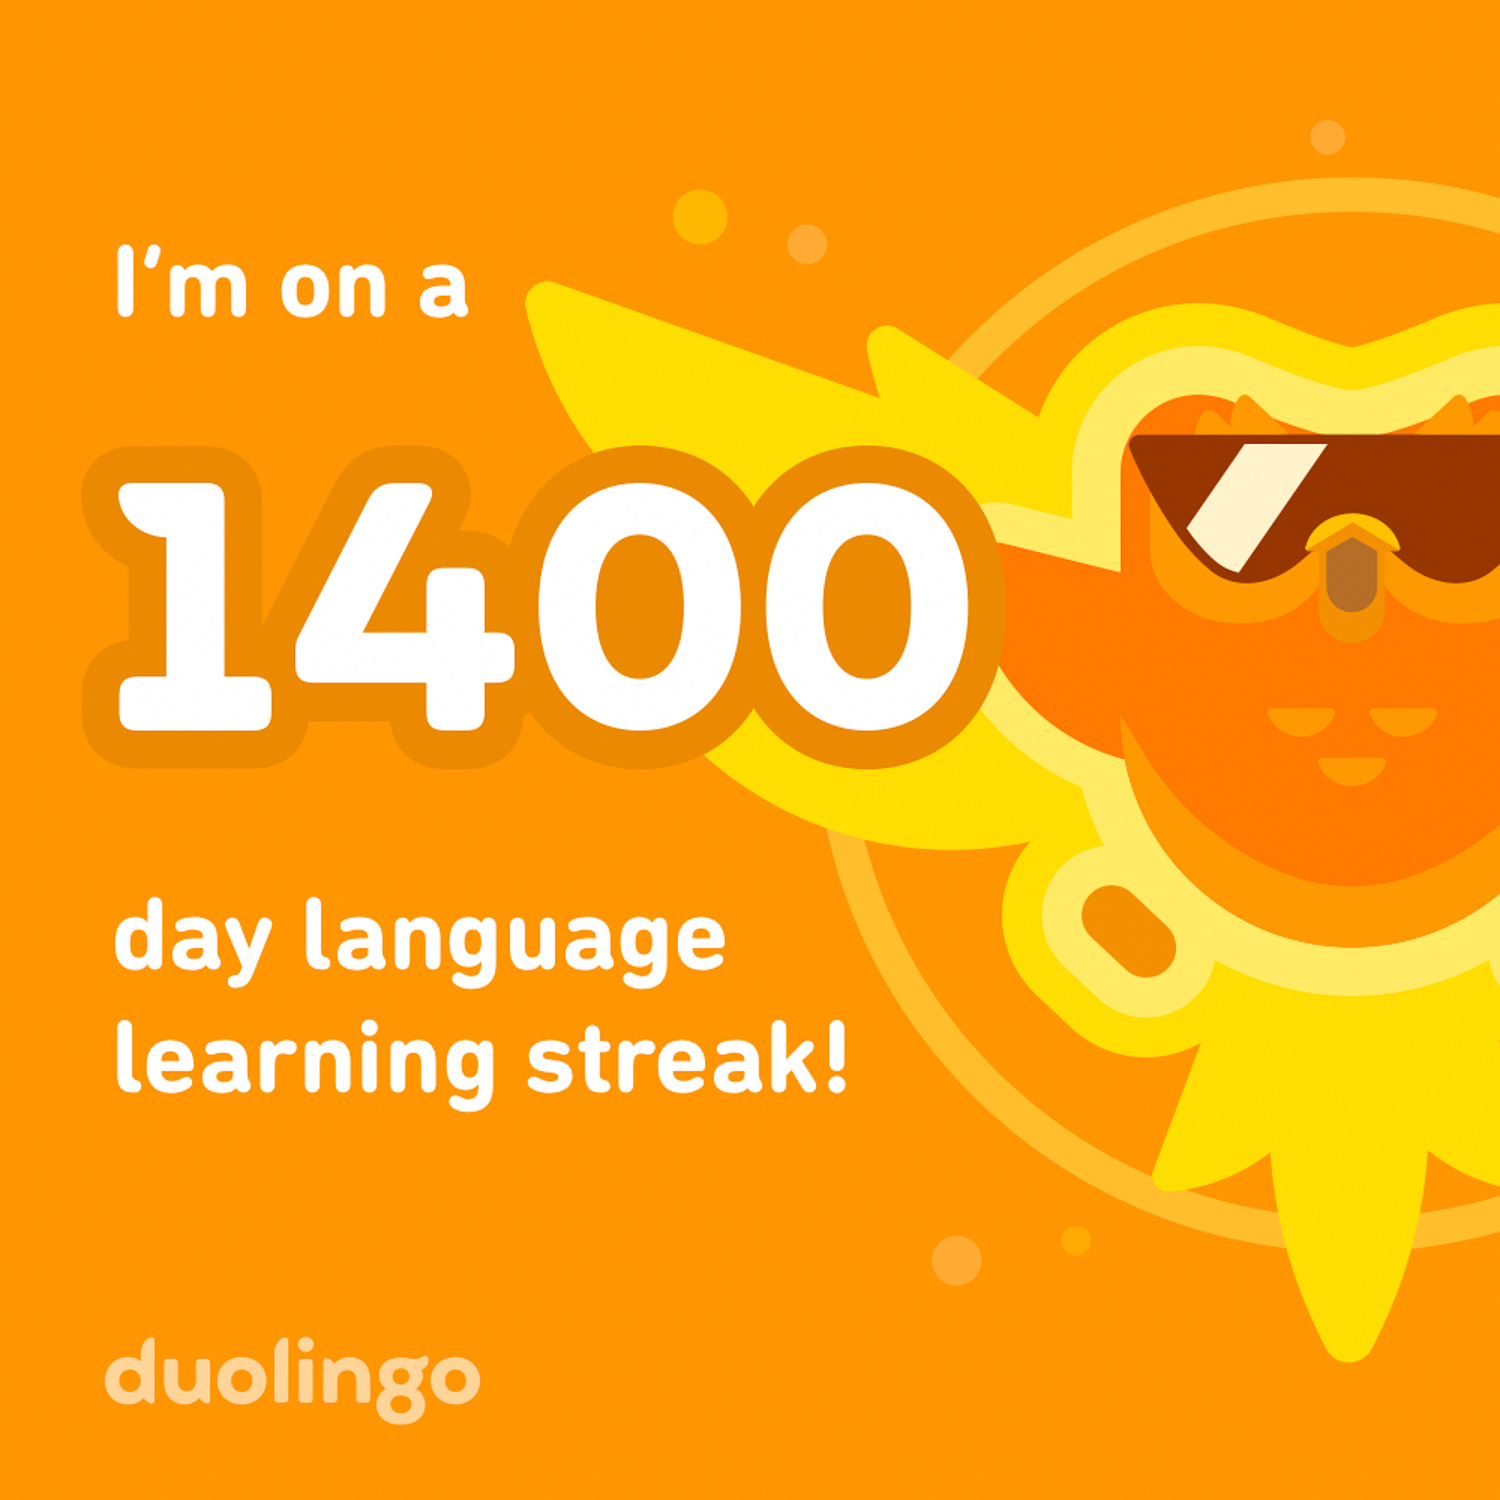 An orange tile with a cartoon owl wearing sunglasses and the text "I'm oo a 1400 day language learning streak" in white letters